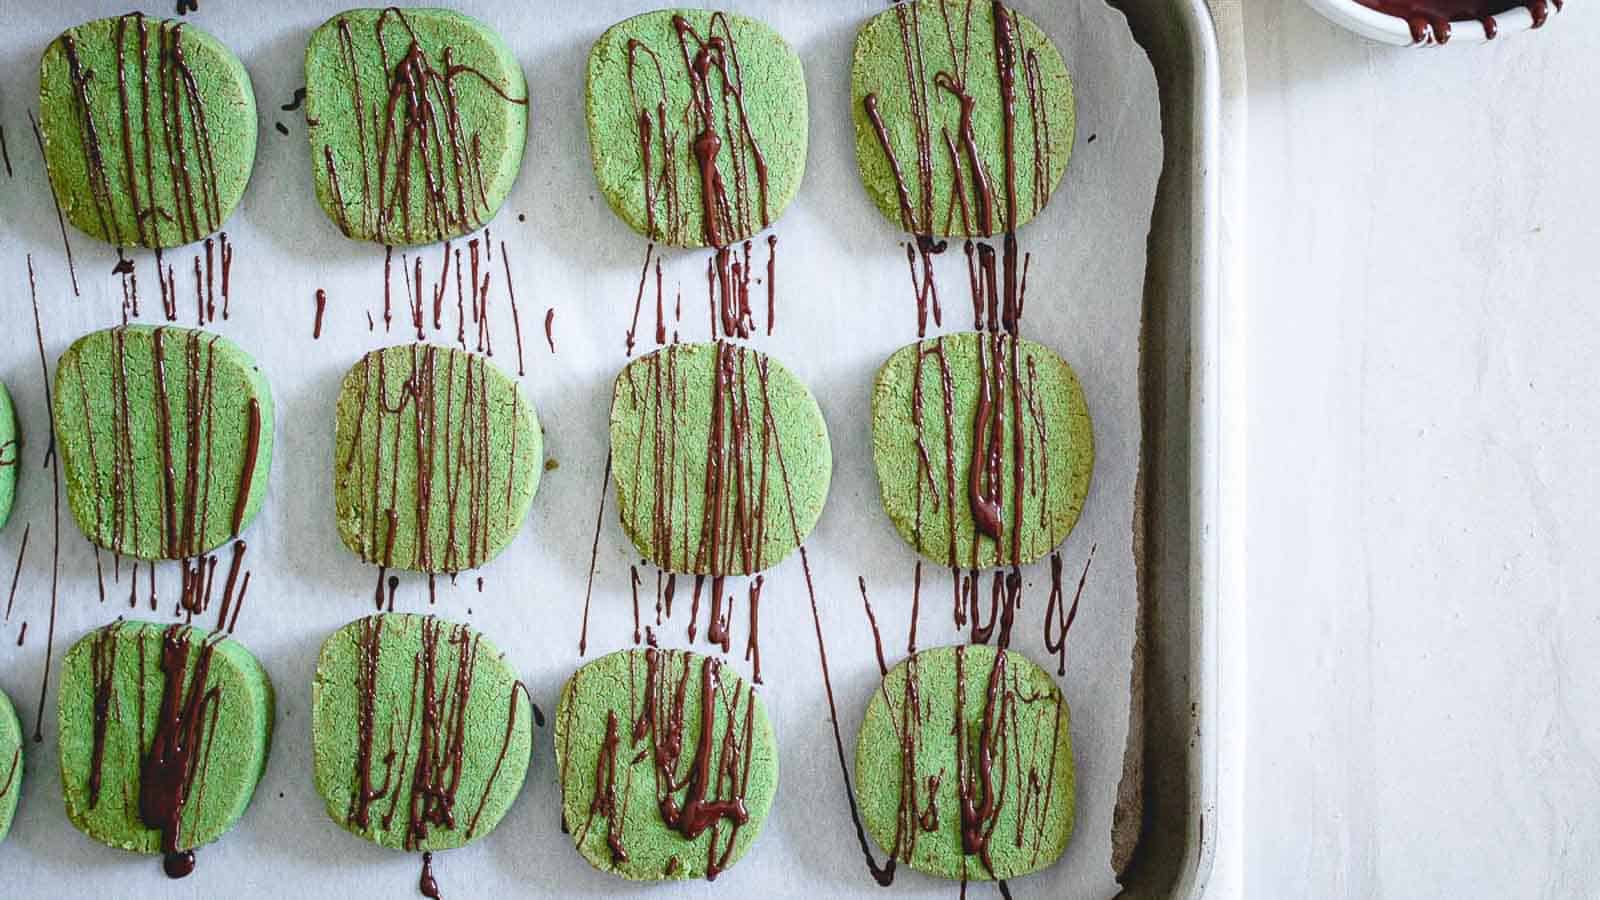 Green cookies with chocolate drizzle on a baking sheet.